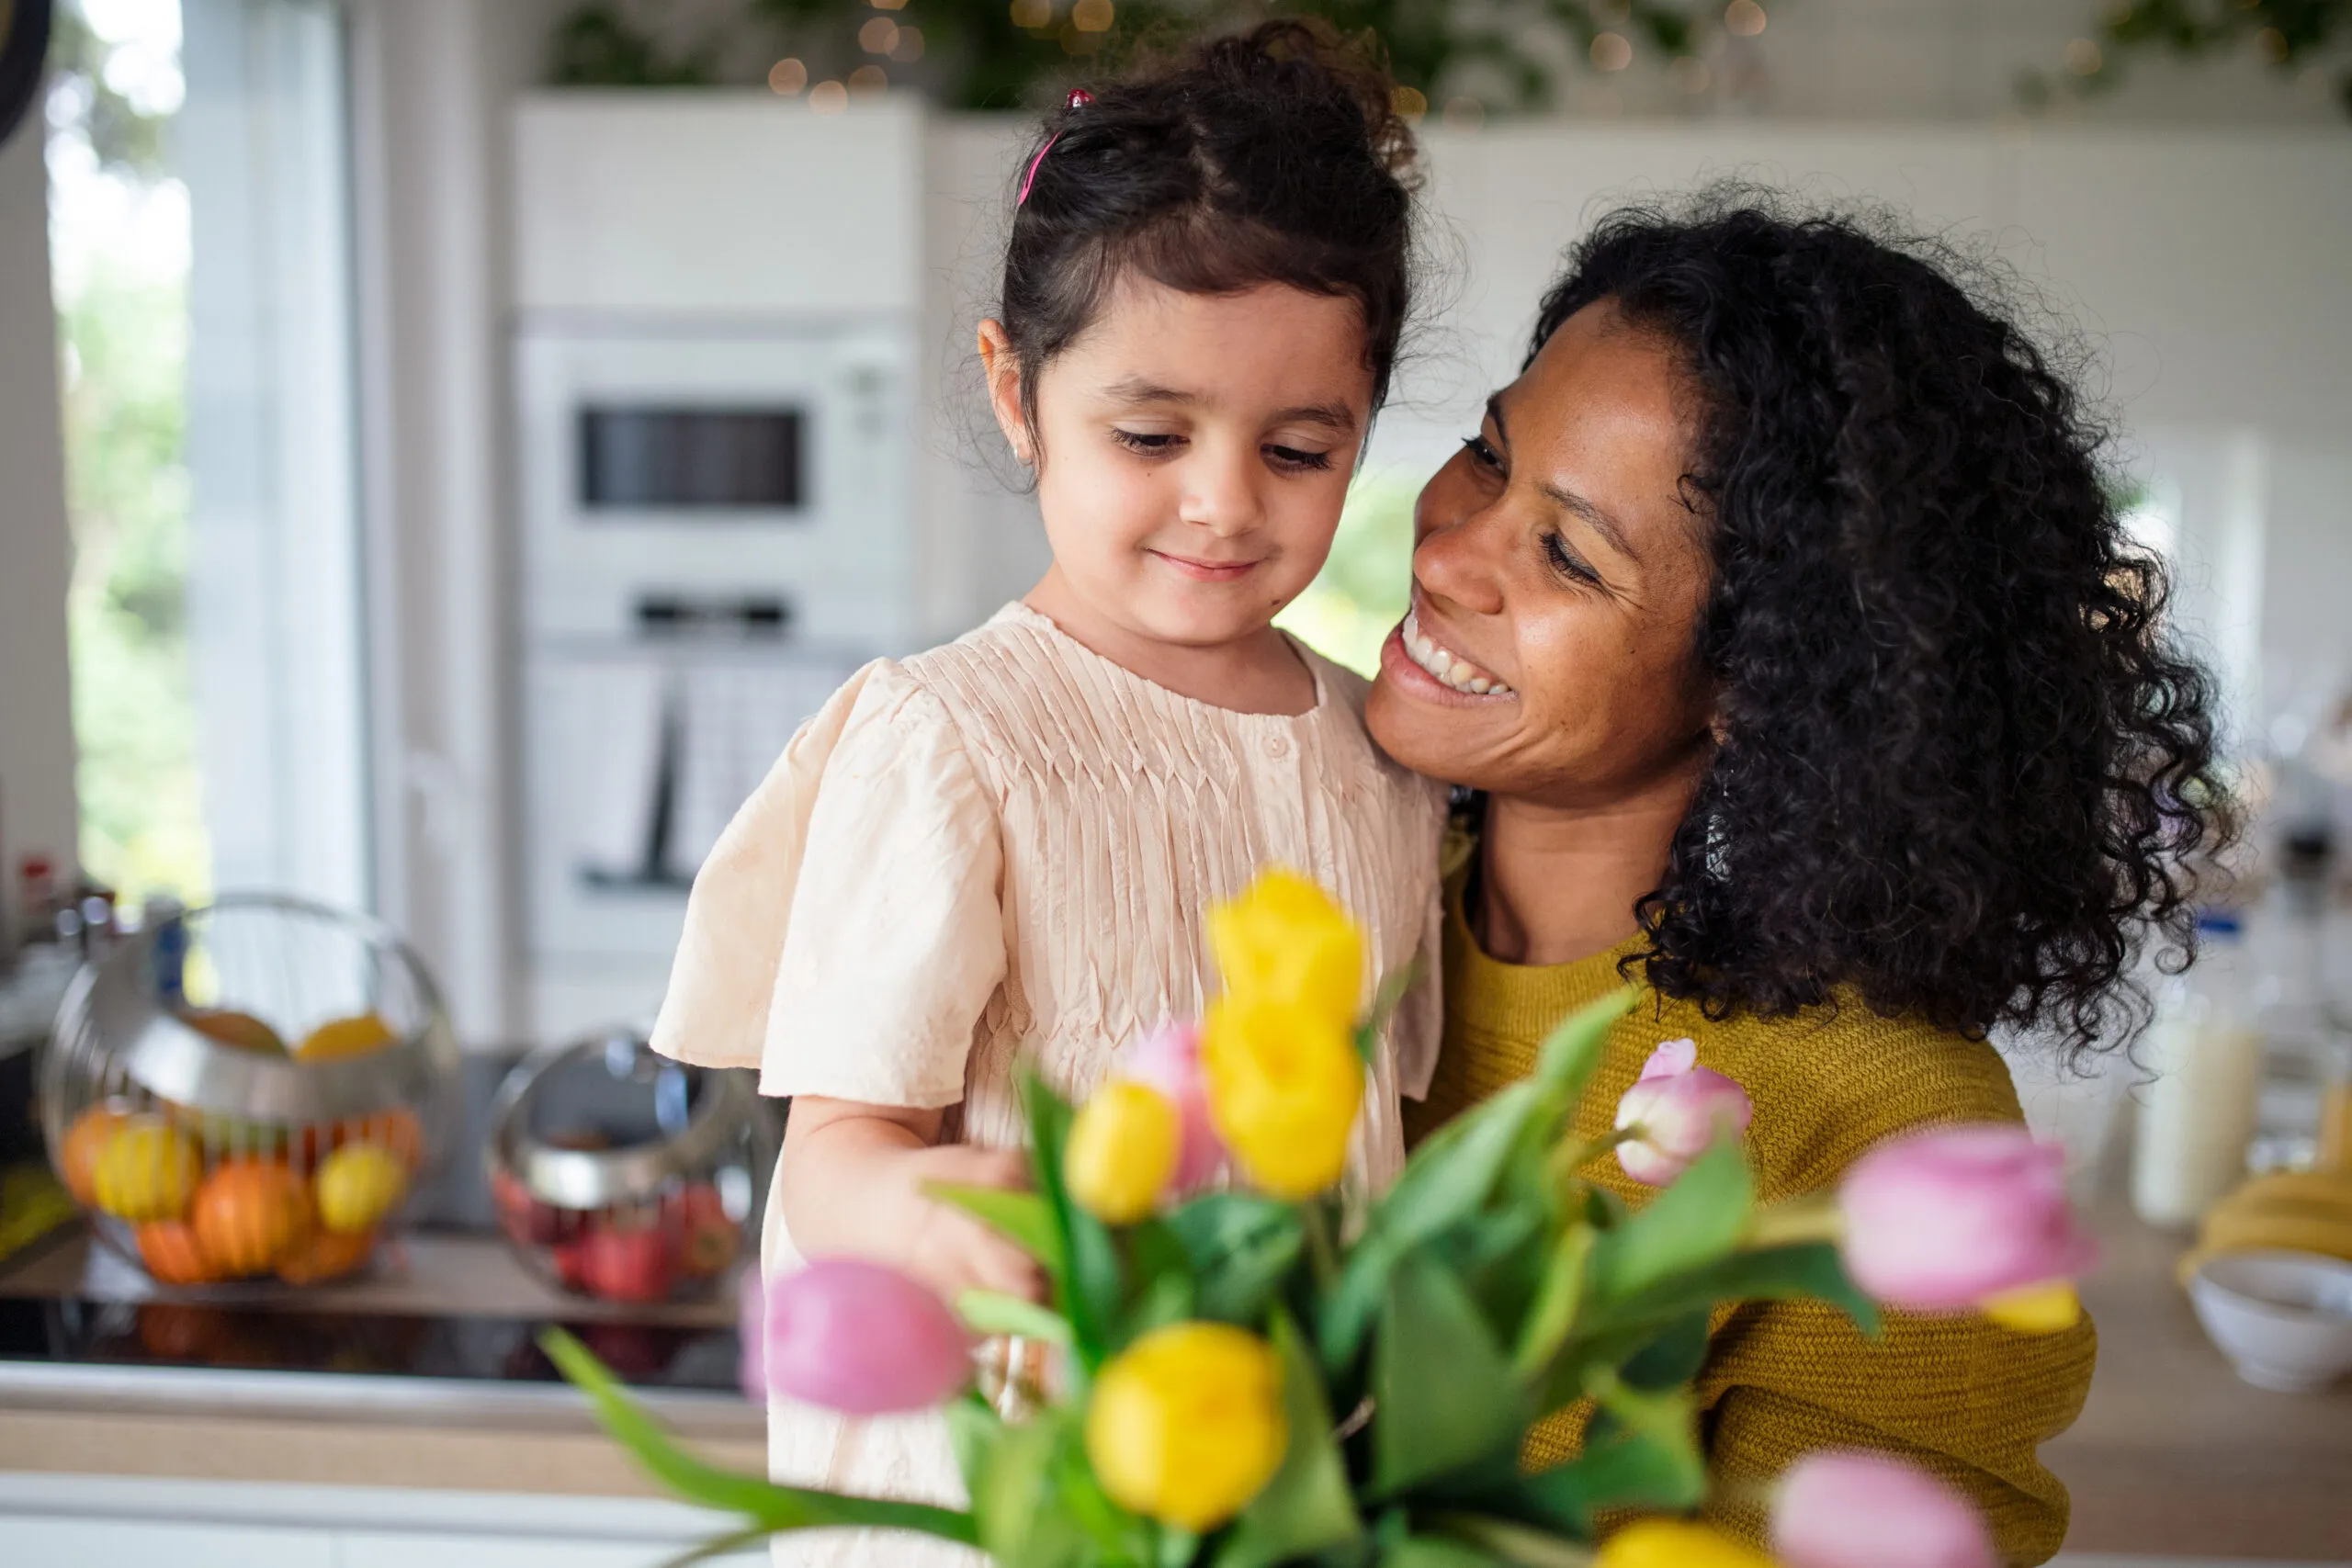 Multiracial girl giving flowers her mother in their kitchen, having fun.